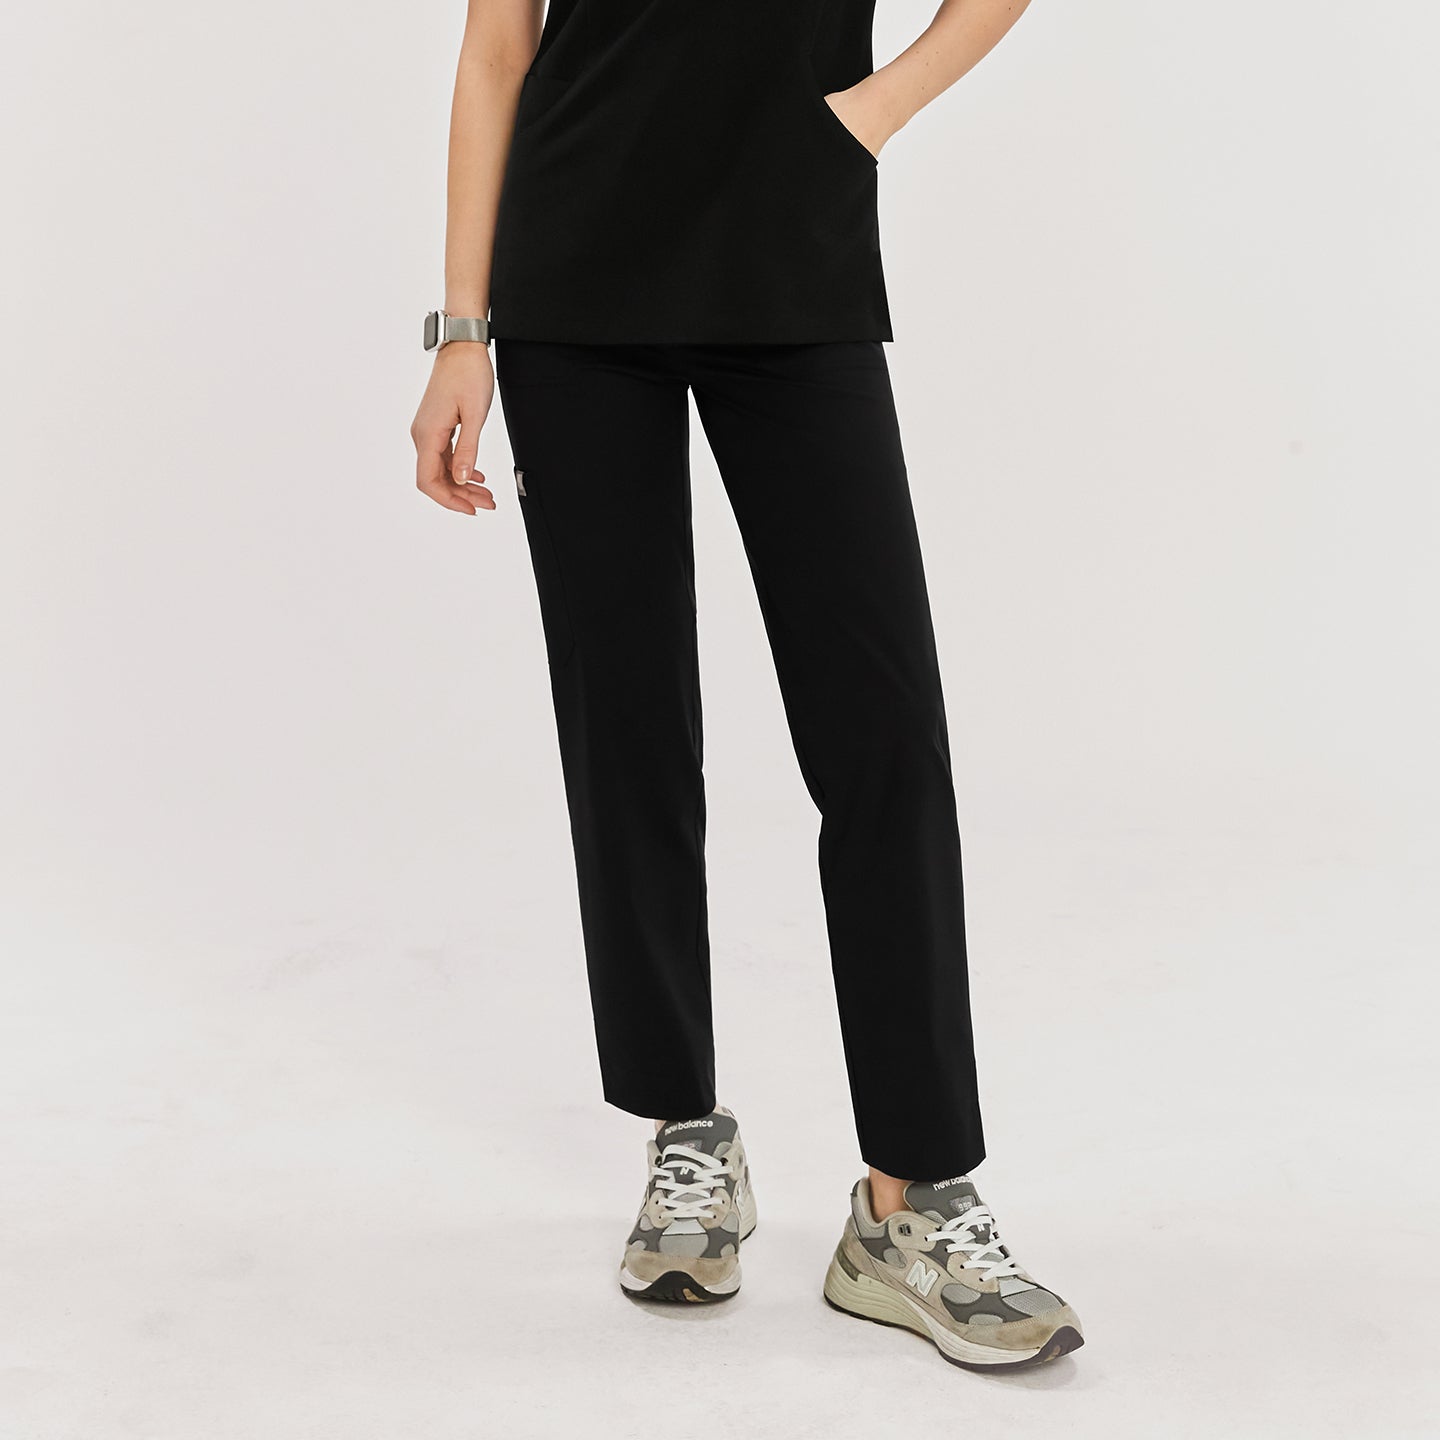 Woman wearing black zipper slit scrub pants with side pockets, paired with gray New Balance sneakers, in a front view,Rich Black